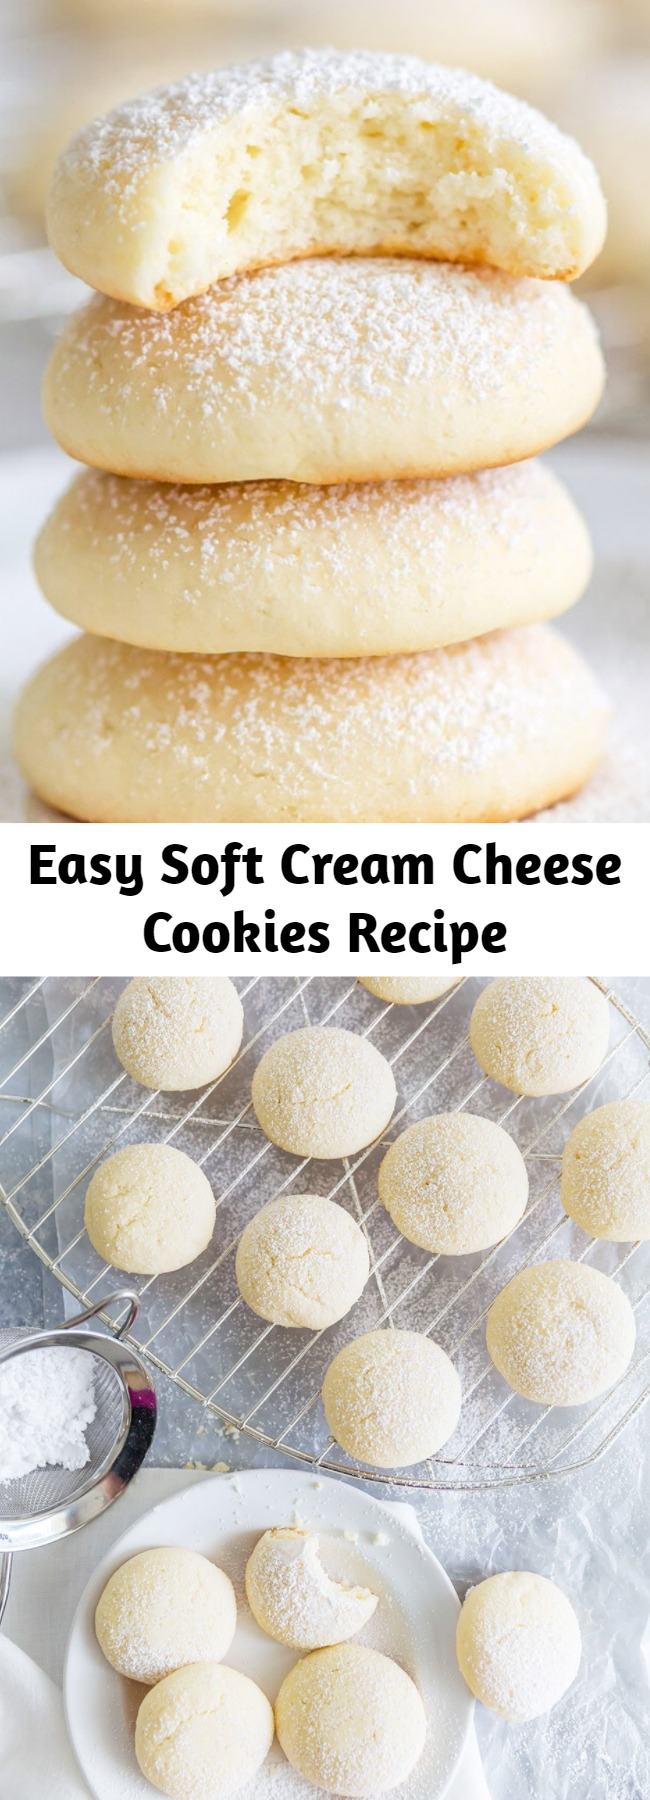 Easy Soft Cream Cheese Cookies Recipe - Pillowy soft cookies that melt in your mouth! Cream cheese cookies are the most heavenly little bites of sweetness! They’re addicting; you’ve been warned! #creamcheesecookies